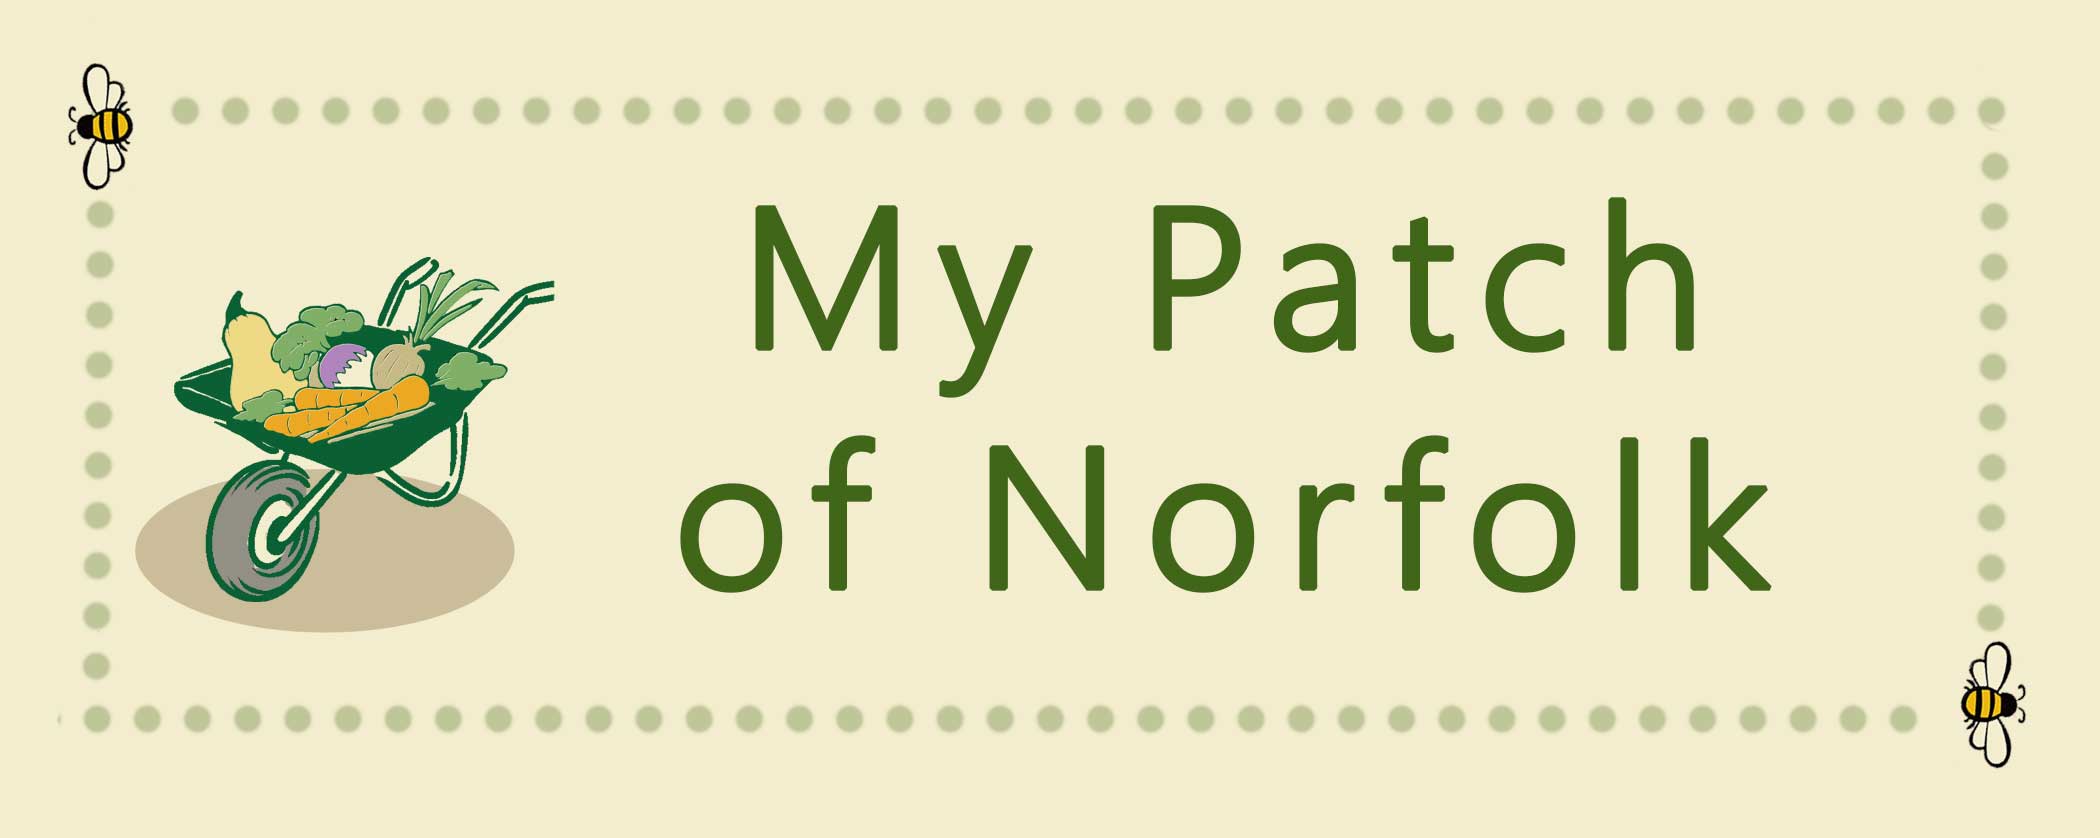 My Patch of Norfolk